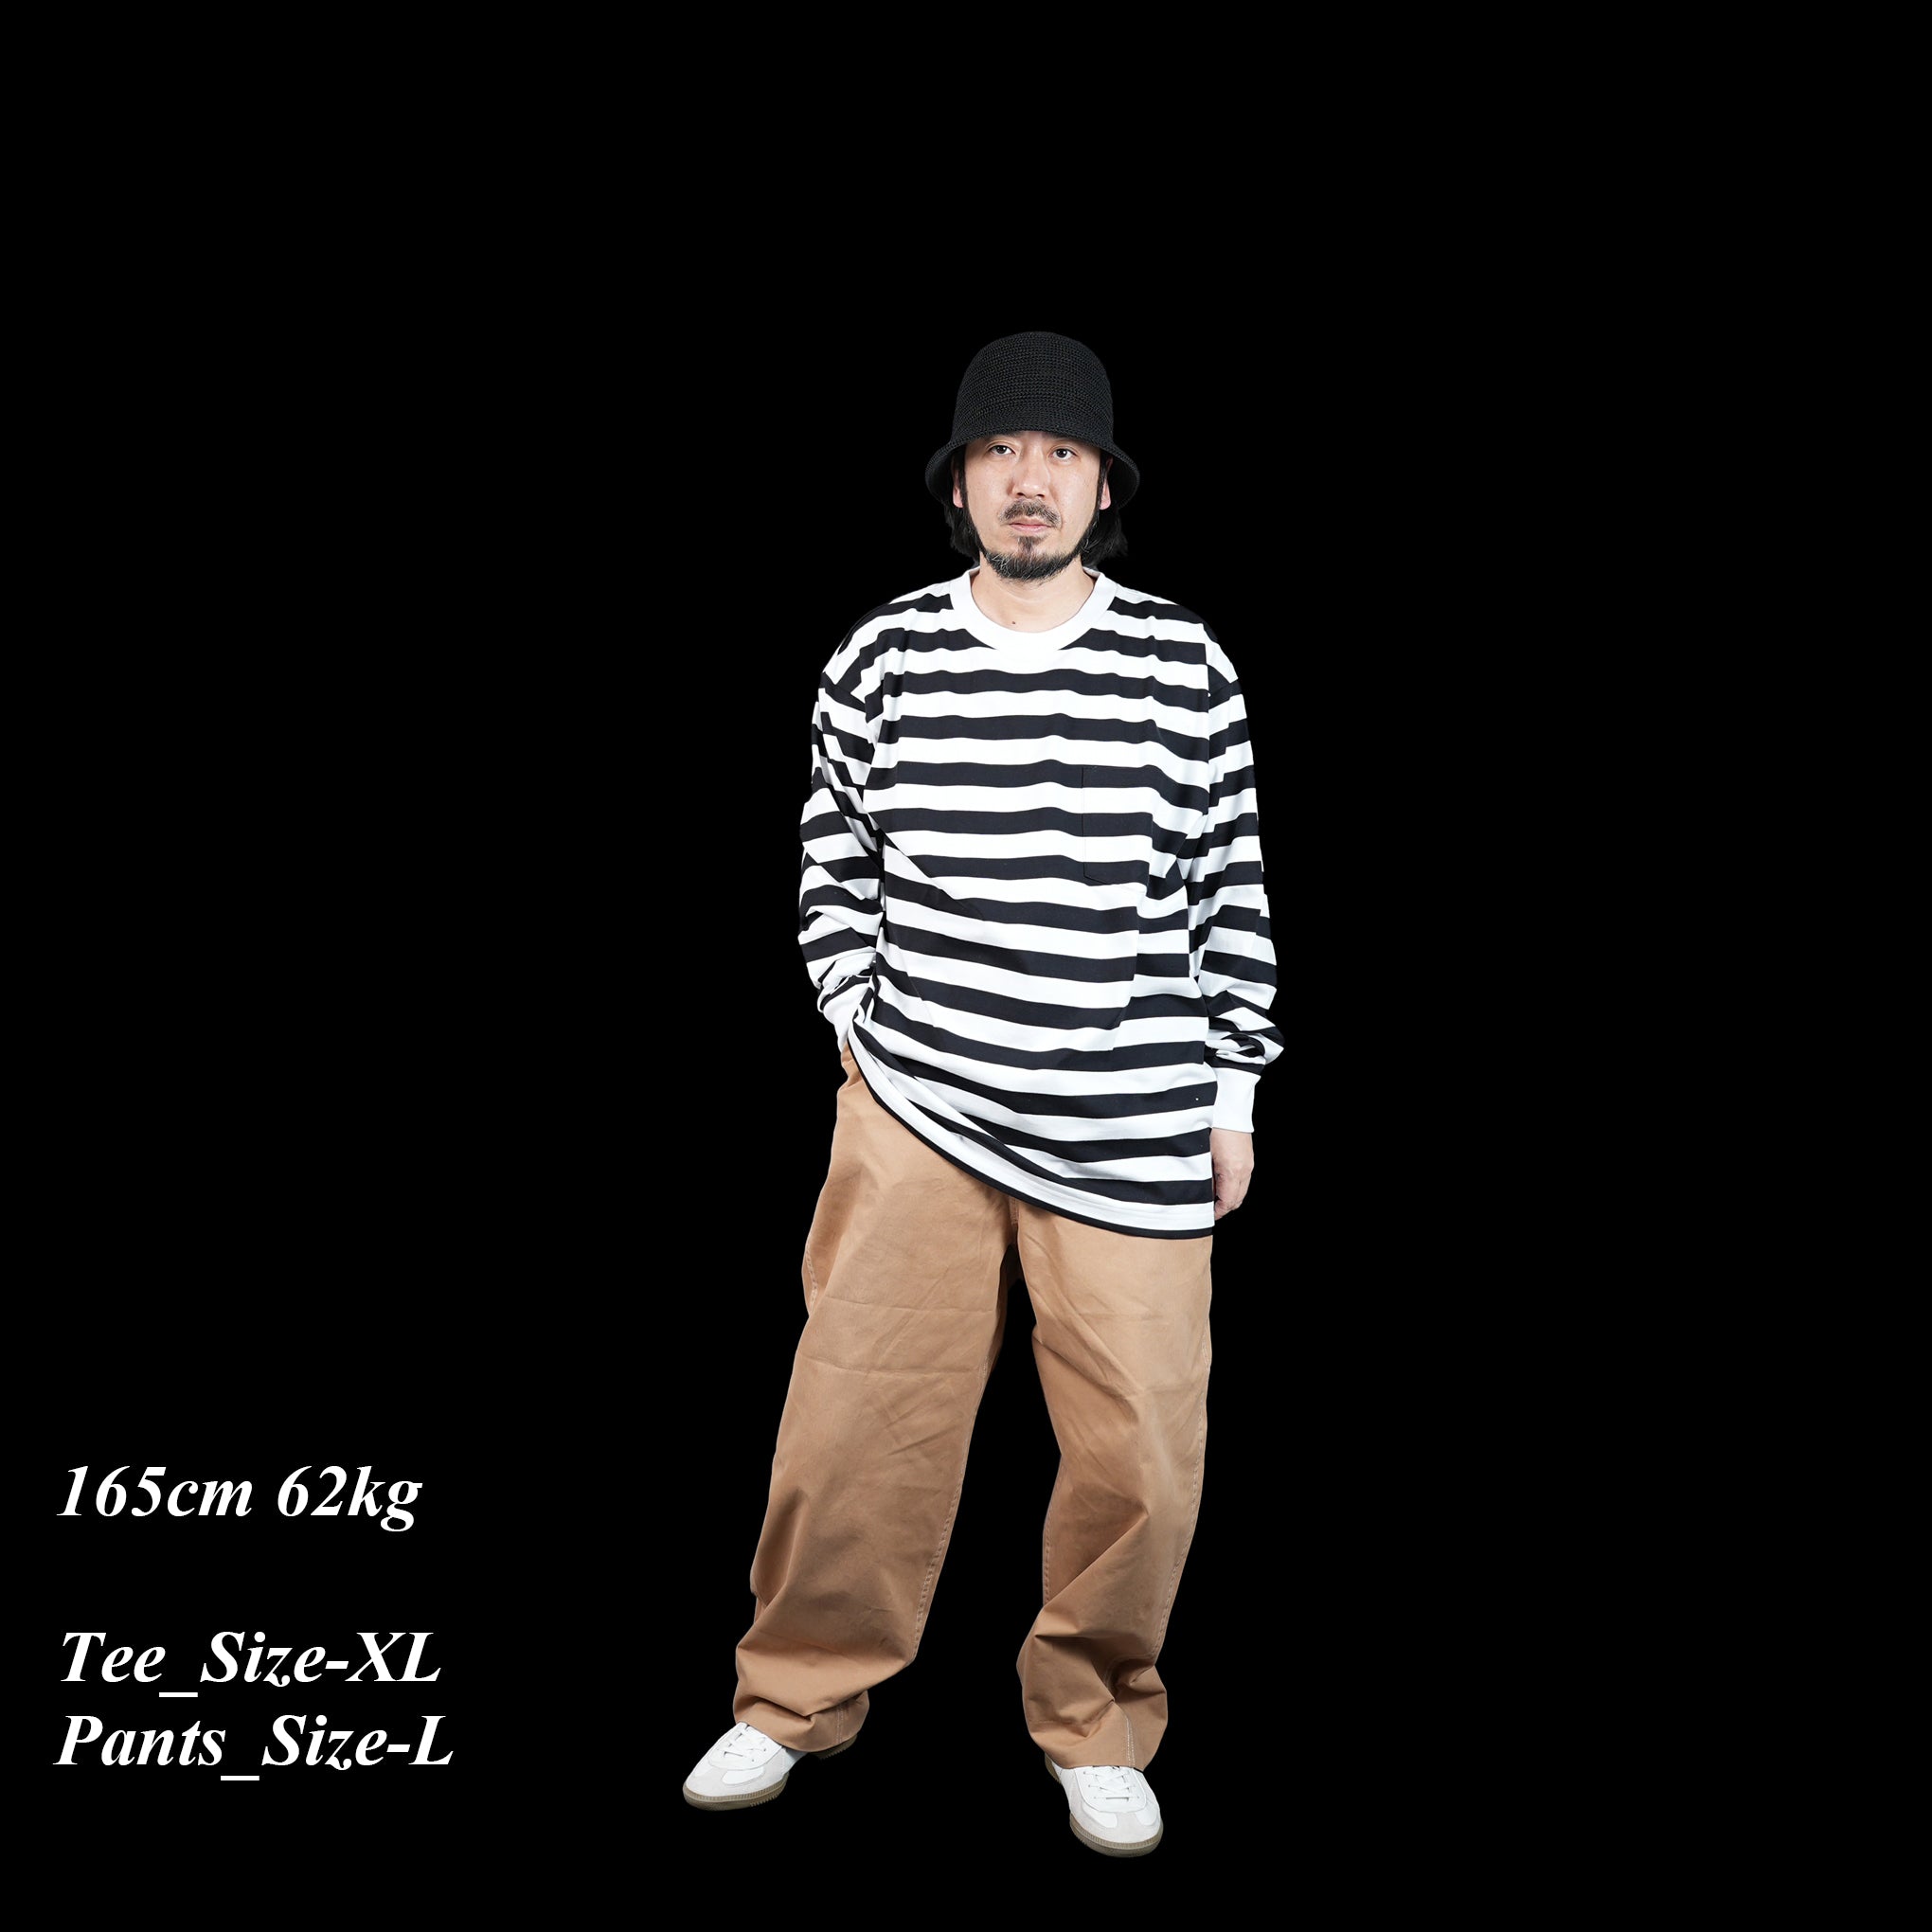 No:PH23SS-002 | Name:P.H. M.STRIPE L/S TEE | Color:Regular Stripe【POWDERHORN MOUNTAINEERING_パウダーホーンマウンテニアリング】